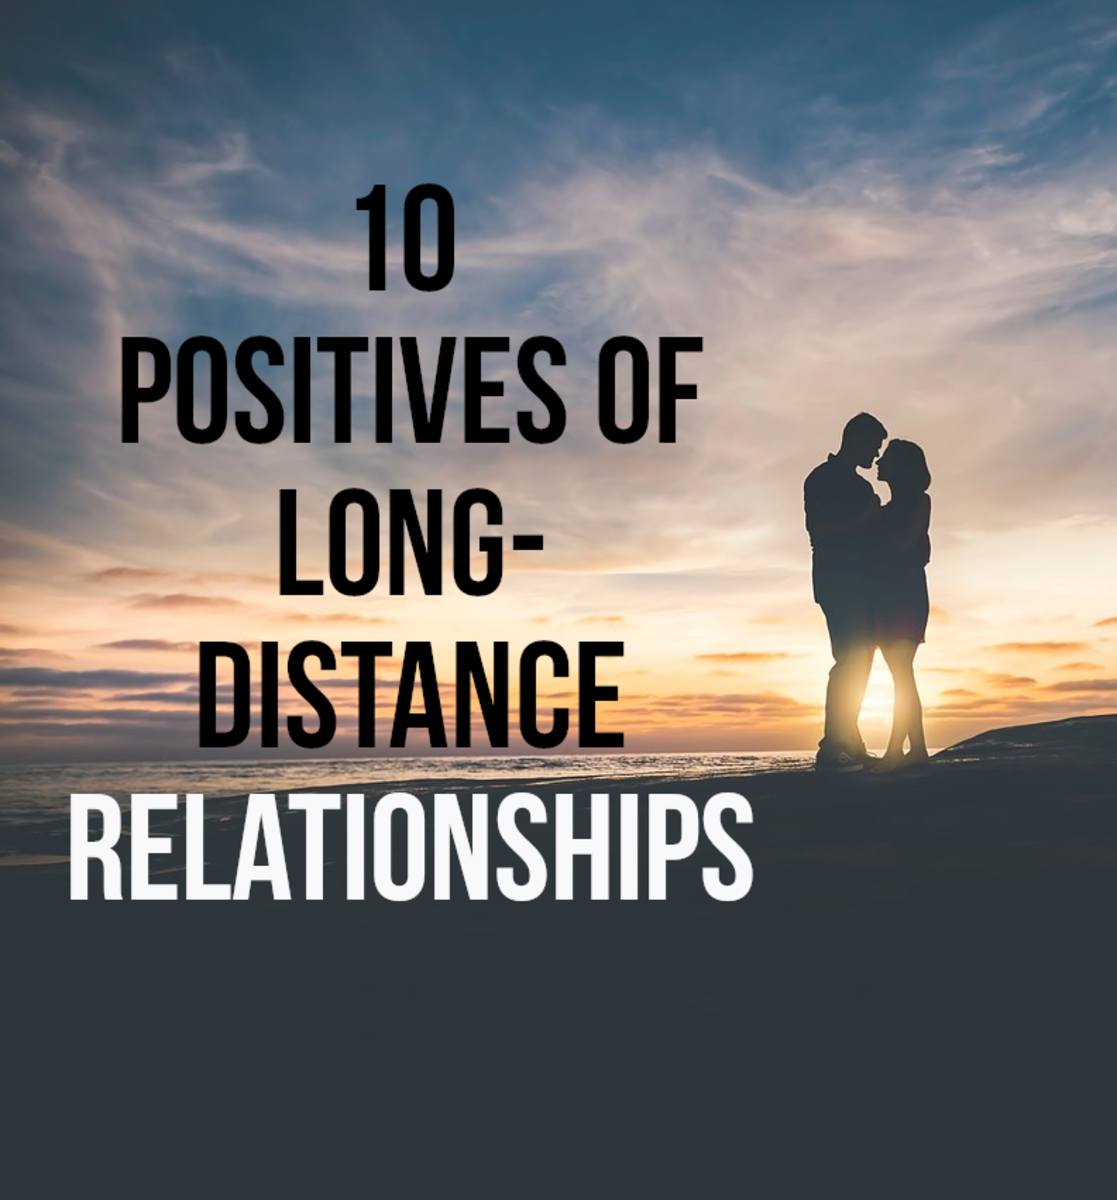 10 Advantages of Long-Distance Relationships